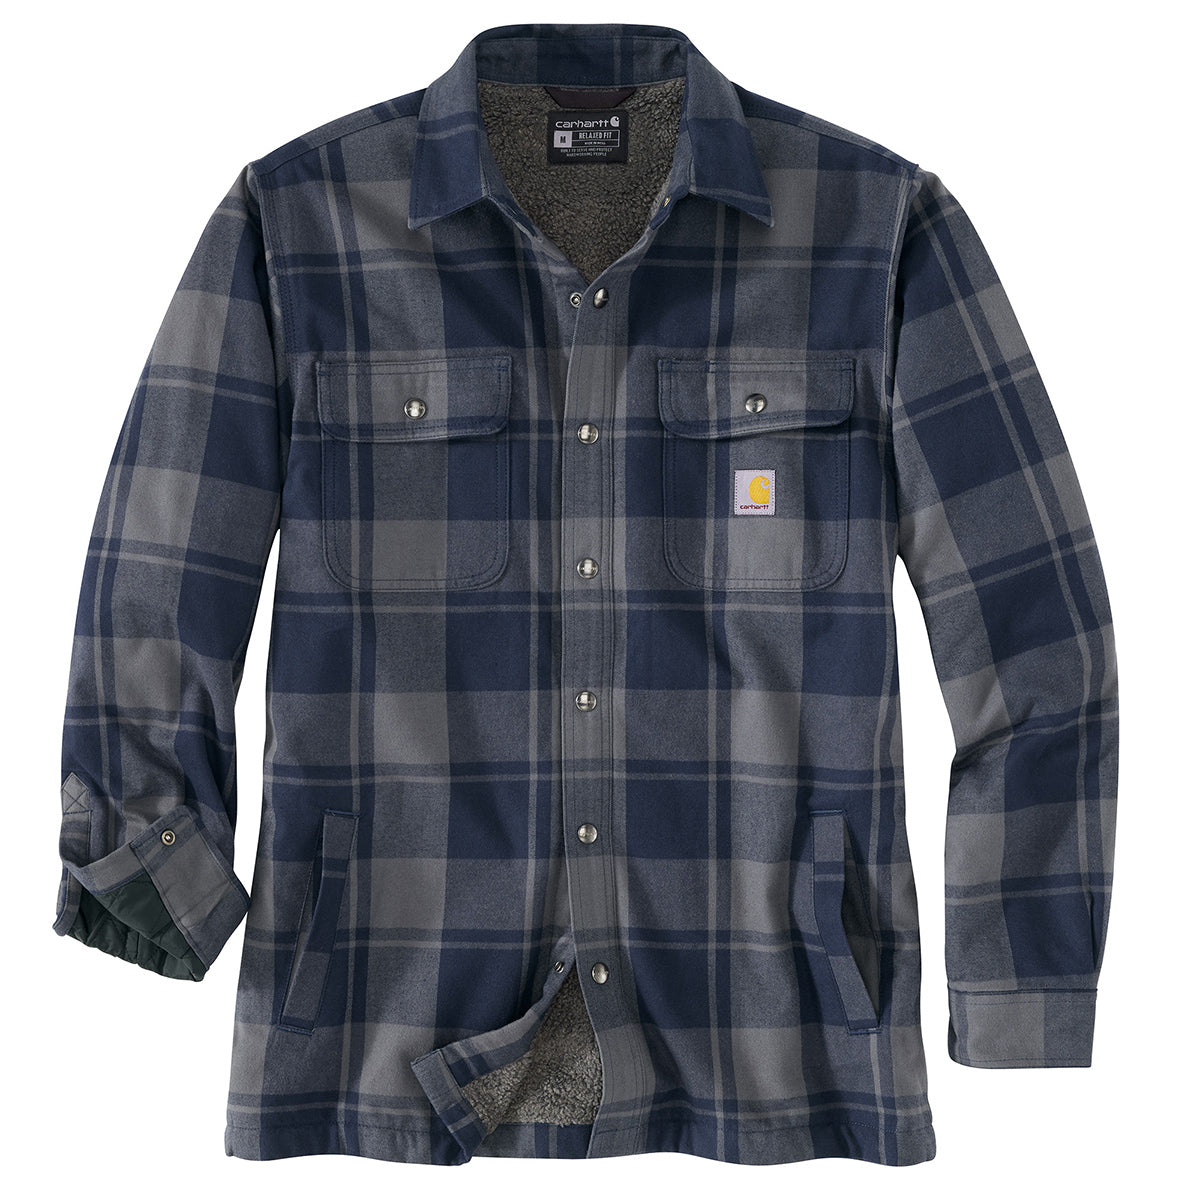 105939 - Relaxed Fit Flannel Sherpa-Lined Shirt Jac